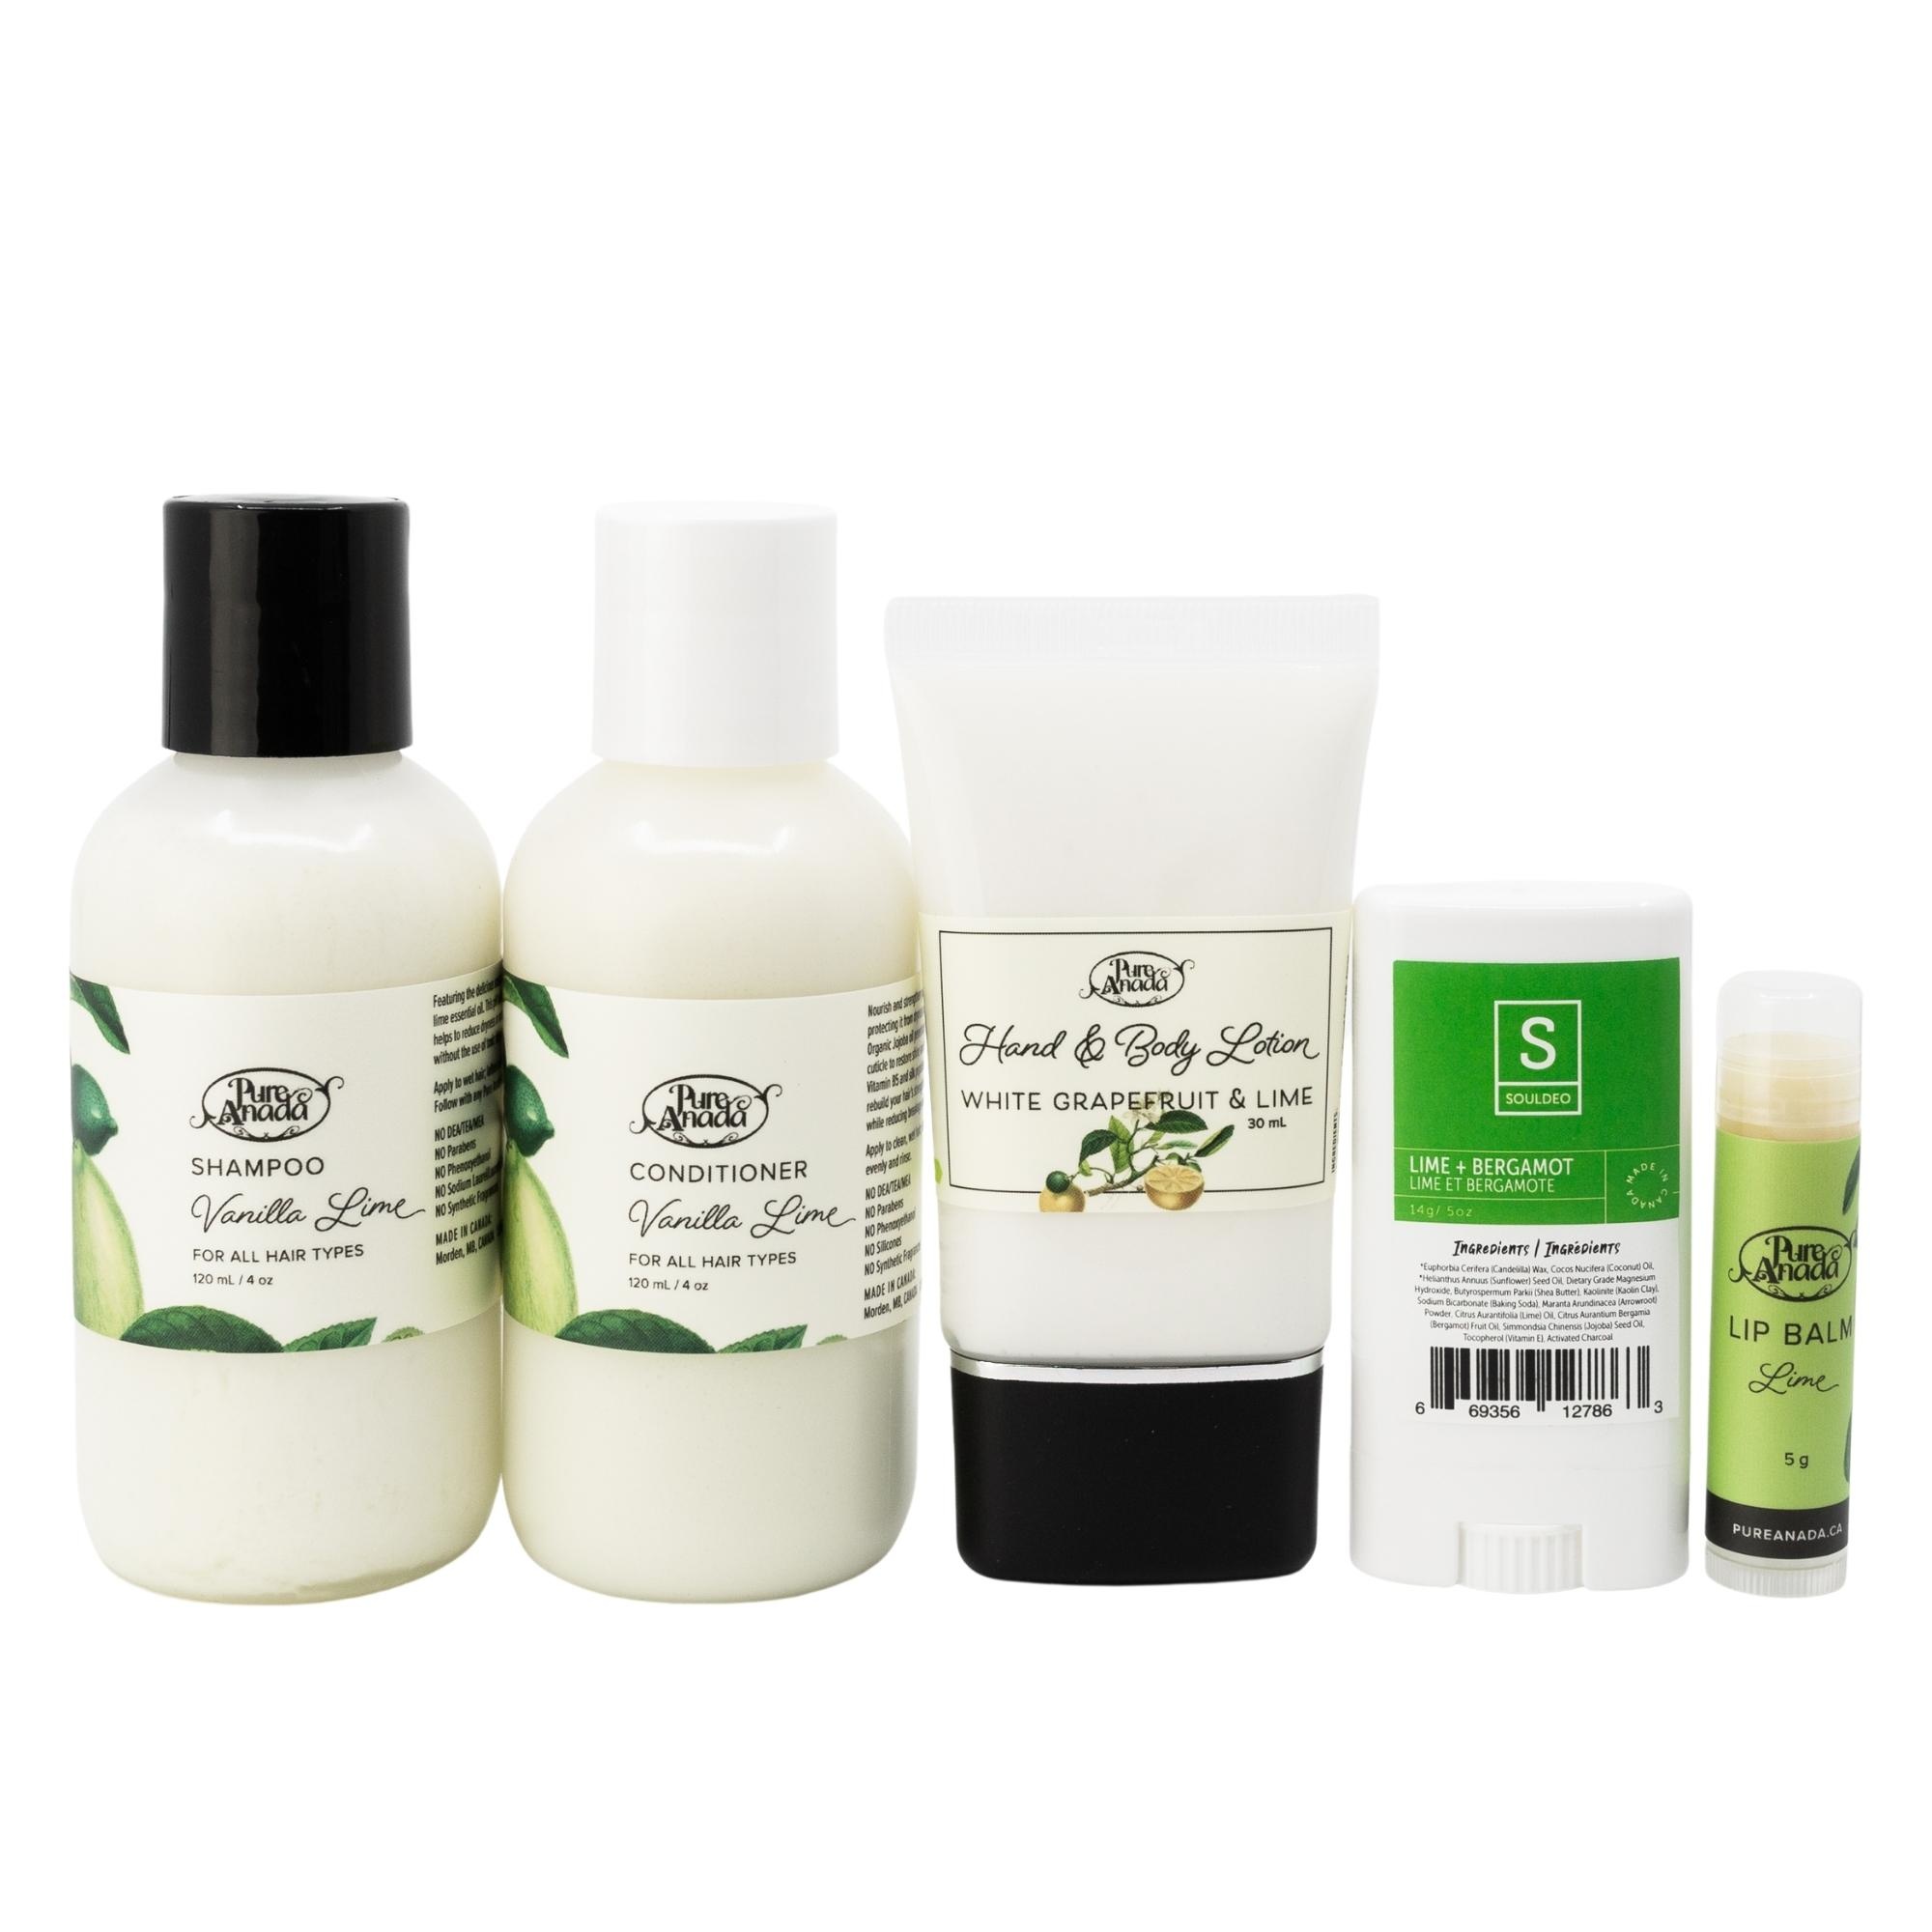 Personal Care Travel Kit-1